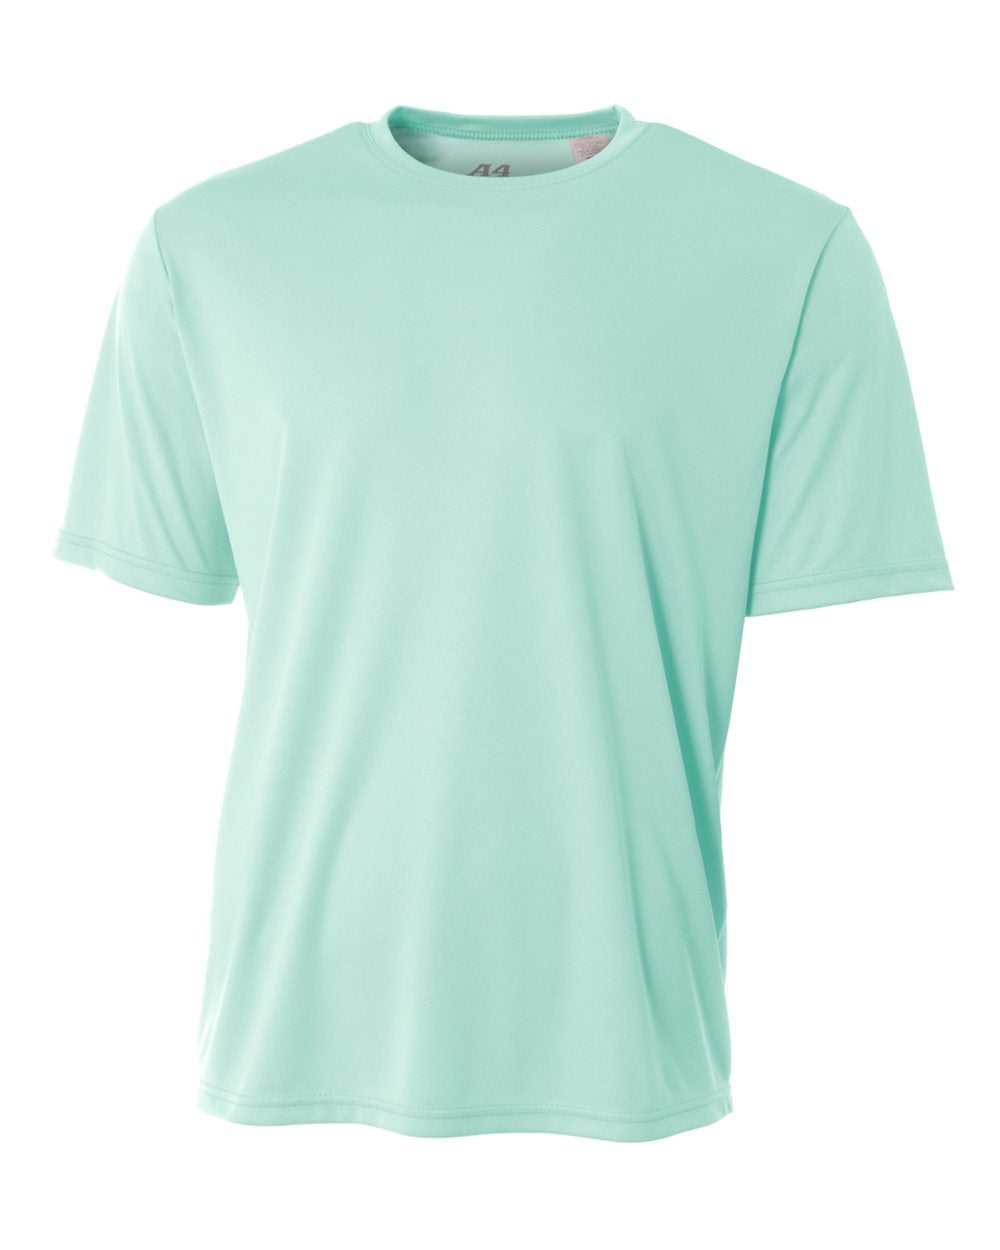 A4 N3142 Cooling Performance Crew - Pastel Mint - HIT a Double